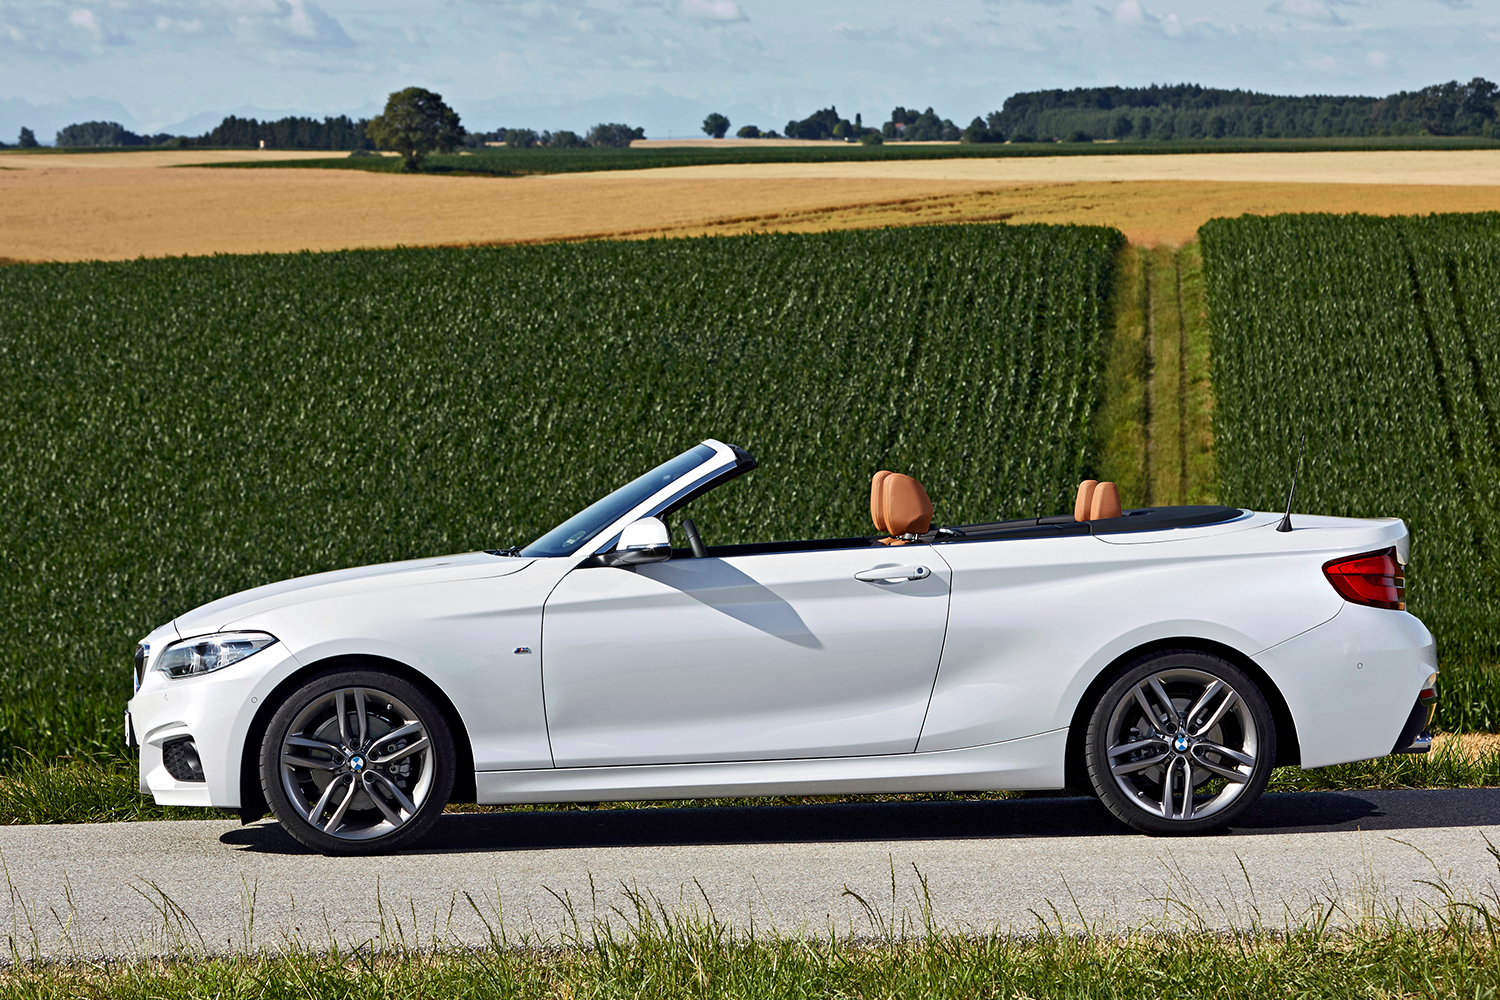 2020 BMW 2 Series convertible in the country